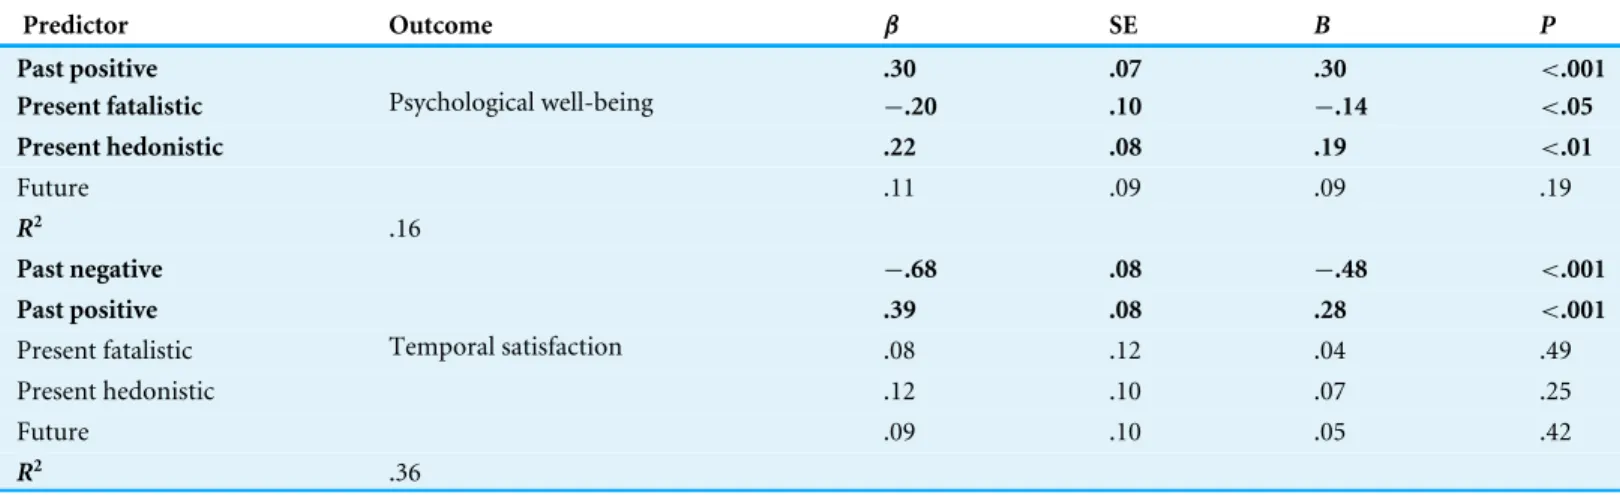 Table 2 (continued) Predictor Outcome β SE B P Past positive .30 .07 .30 &lt;.001 Present fatalistic − .20 .10 − .14 &lt;.05 Present hedonistic .22 .08 .19 &lt;.01 Future Psychological well-being .11 .09 .09 .19 R 2 .16 Past negative − .68 .08 − .48 &lt;.0